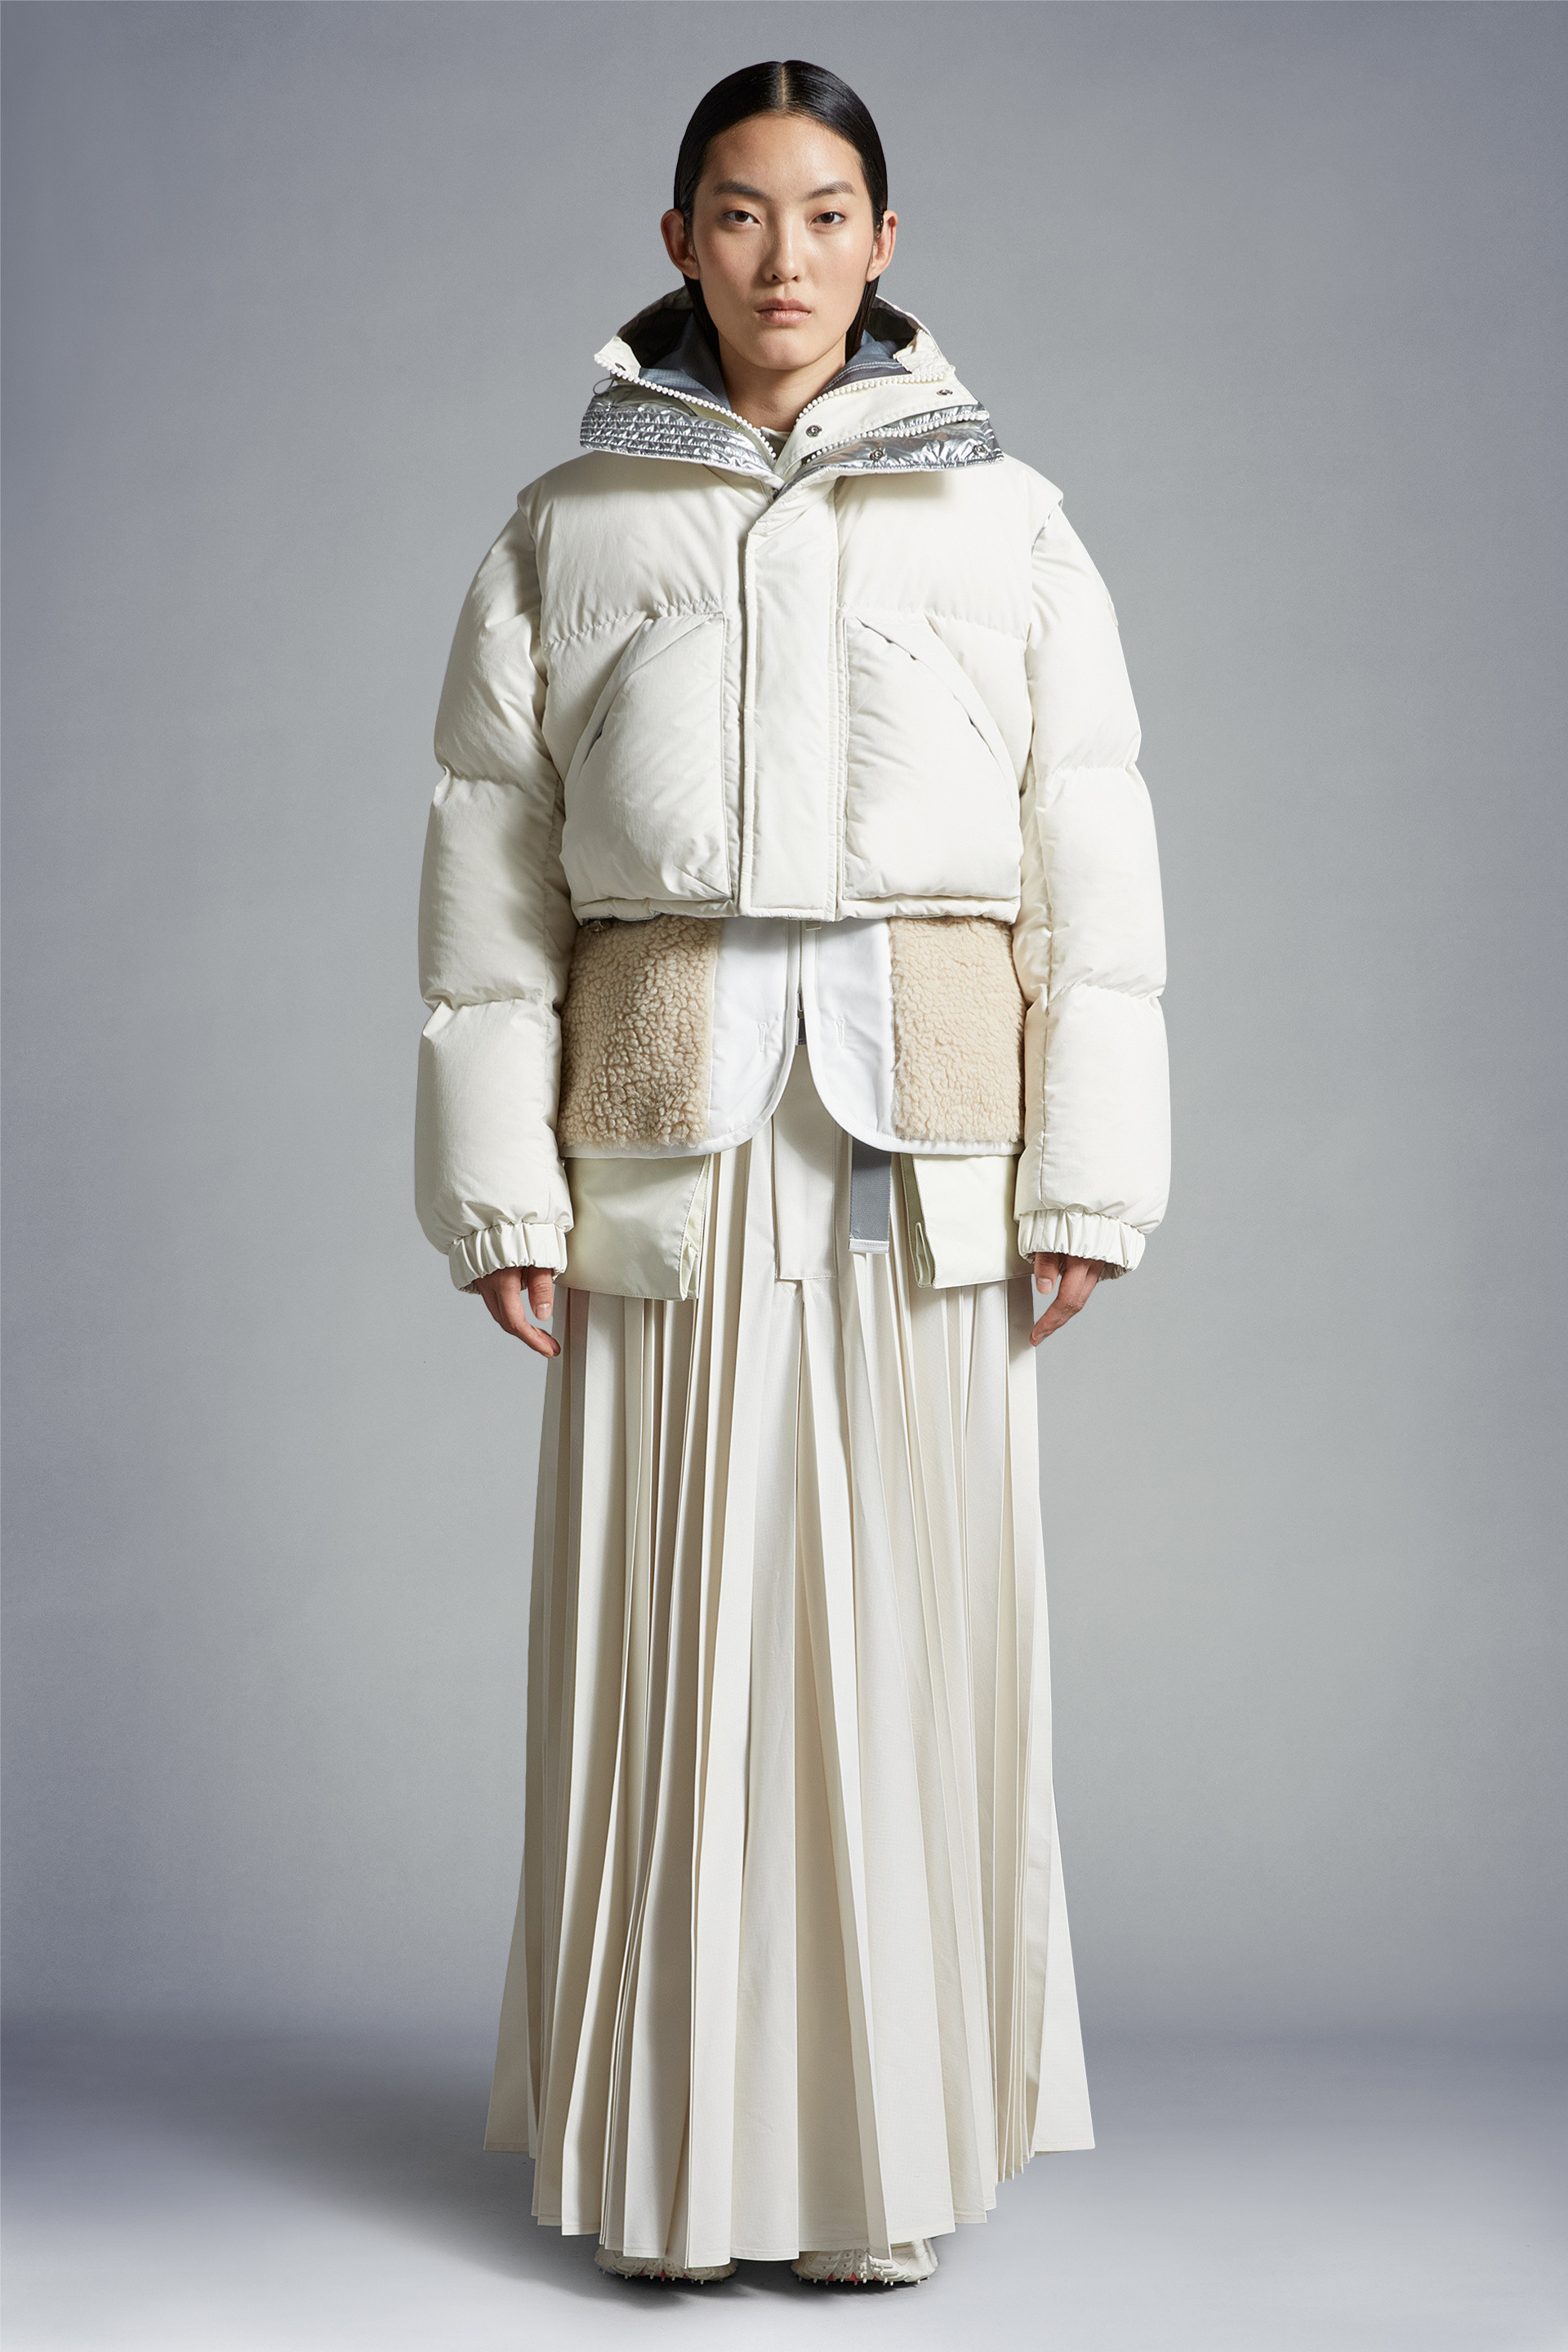 For Special Projects - Moncler x Sacai | Moncler SG